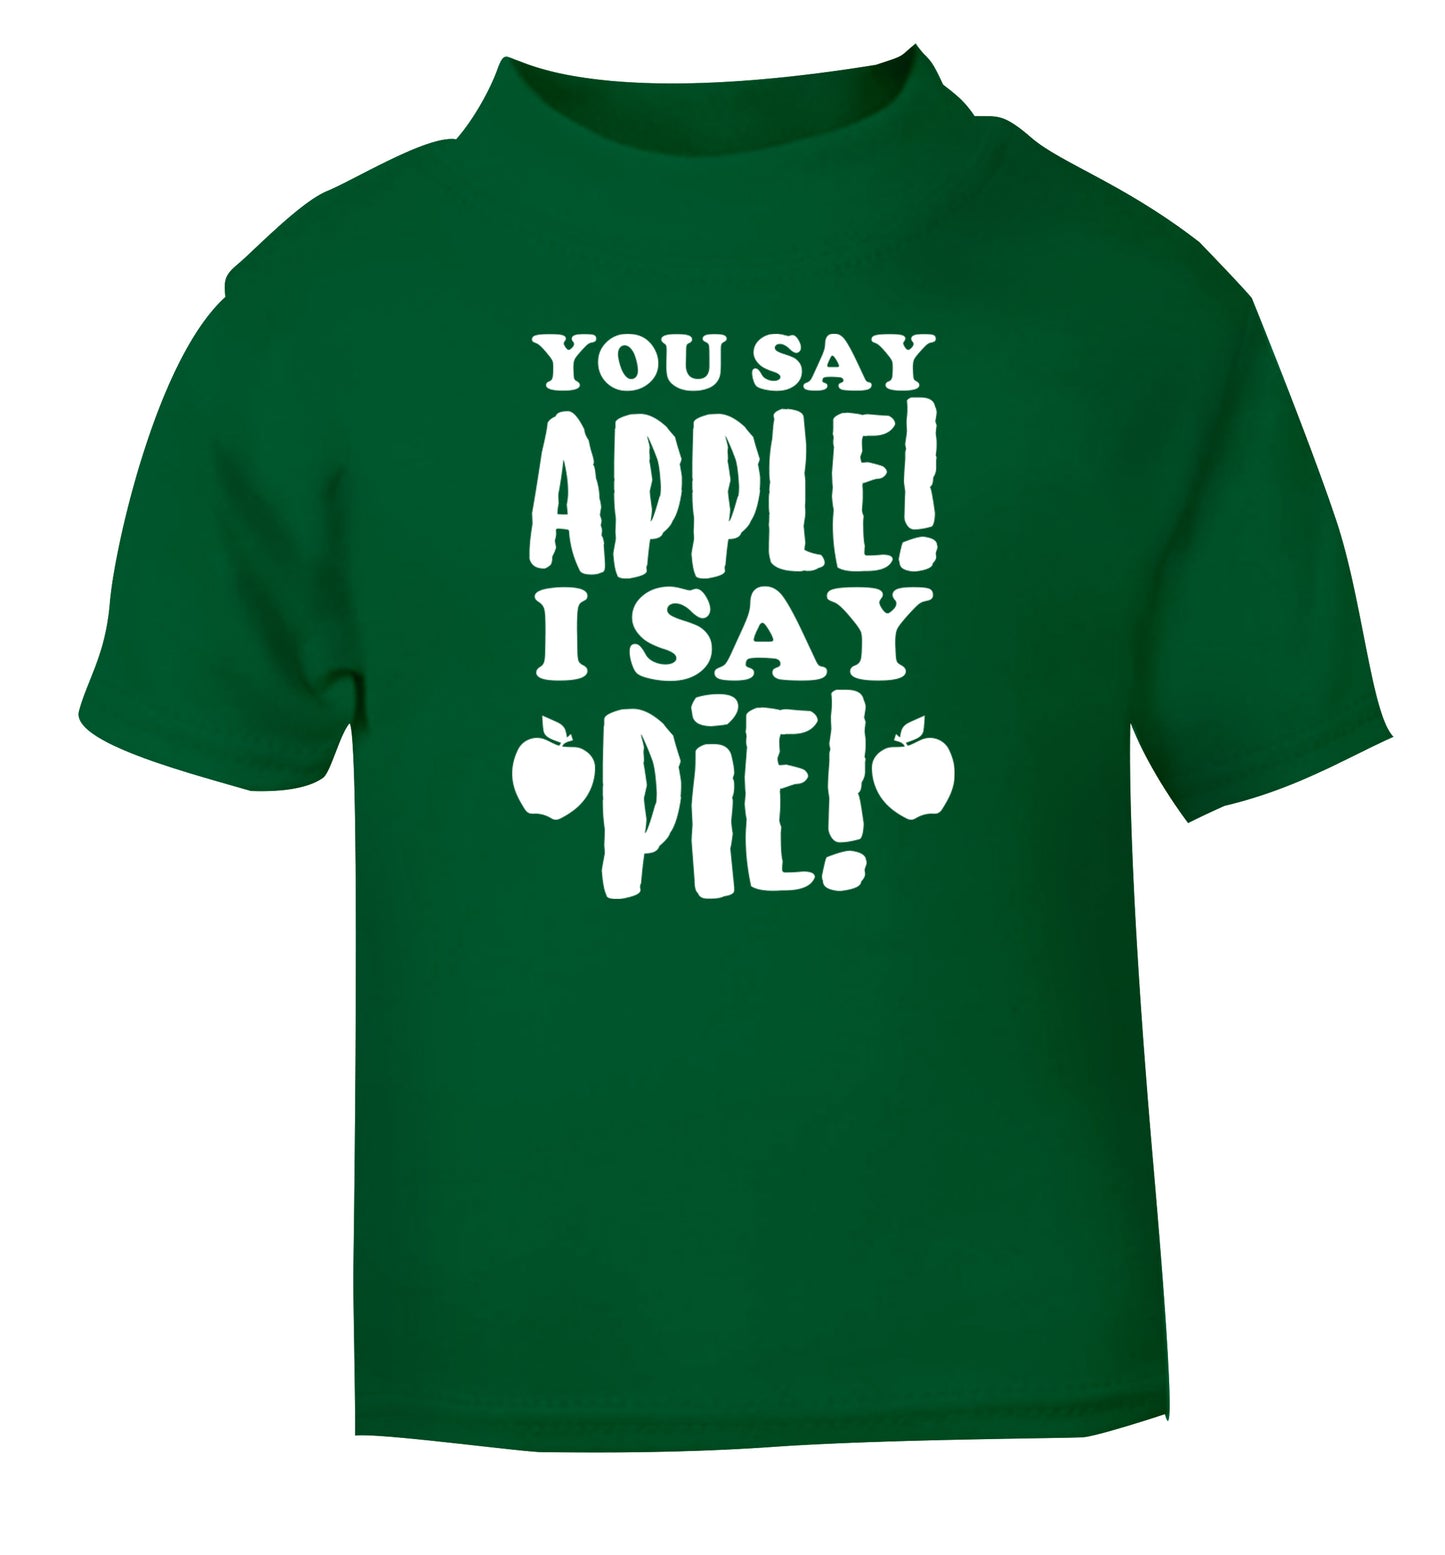 You say apple I say pie! green Baby Toddler Tshirt 2 Years